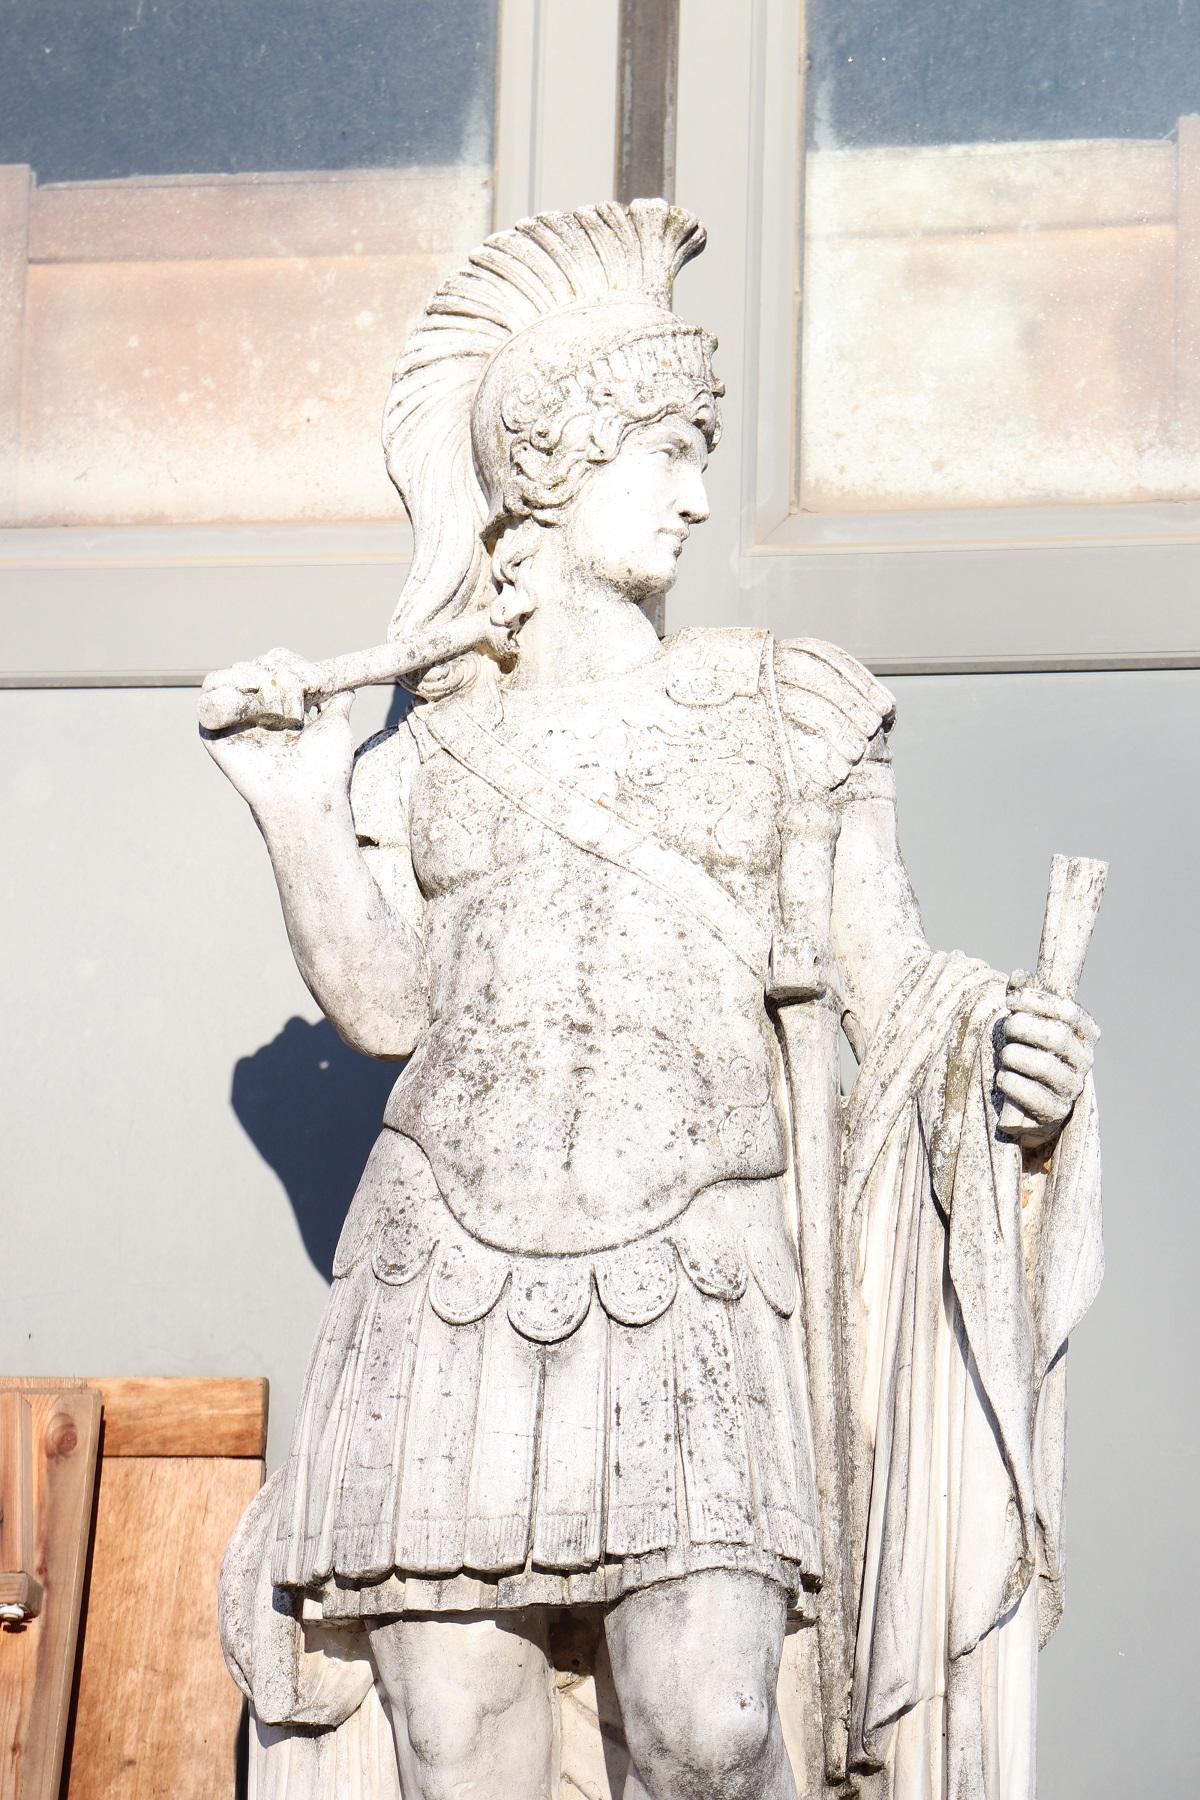 Beautiful refined garden statue in neoclassical style, circa 1930smain material stone mixed with gravel and cement. Beautiful and majestic statue of soldier of ancient Rome. The centurion was one of the ranks of the chain of command in the Roman